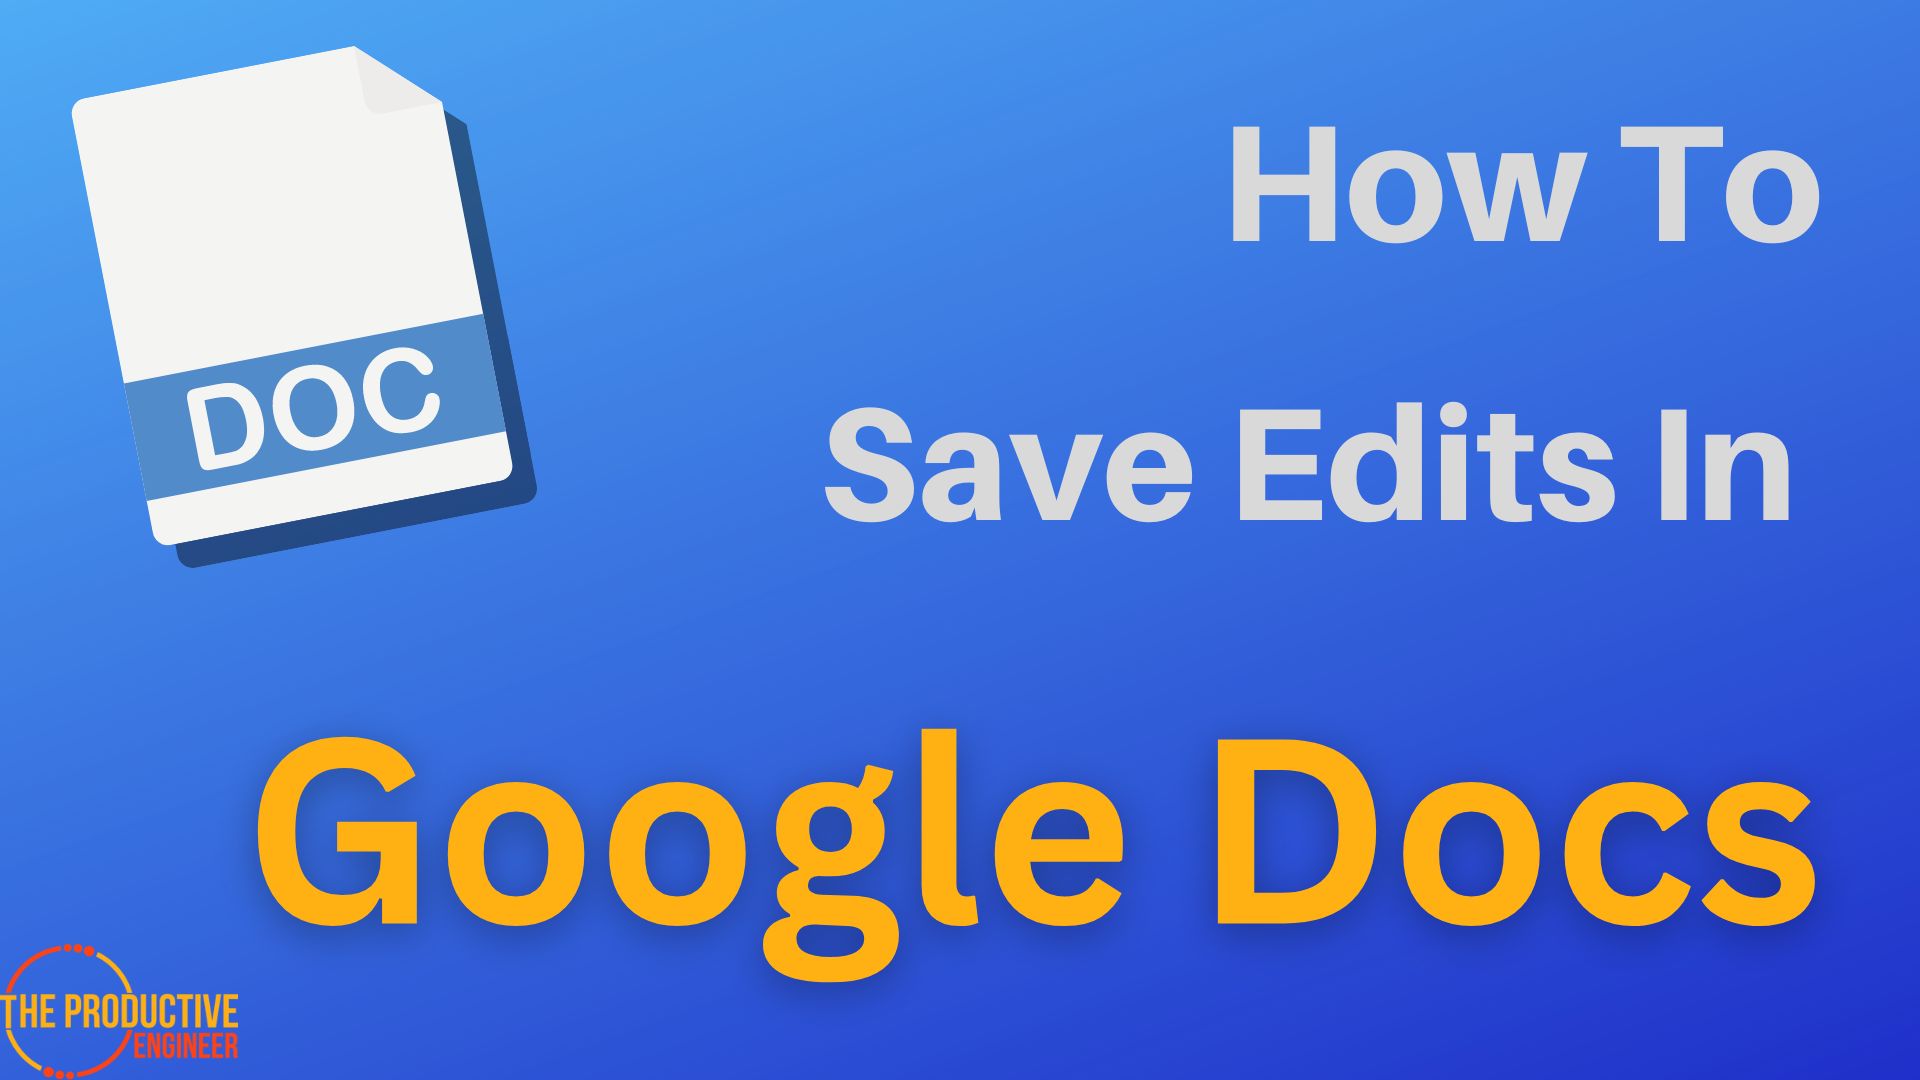 How To Save Edits In Google Docs